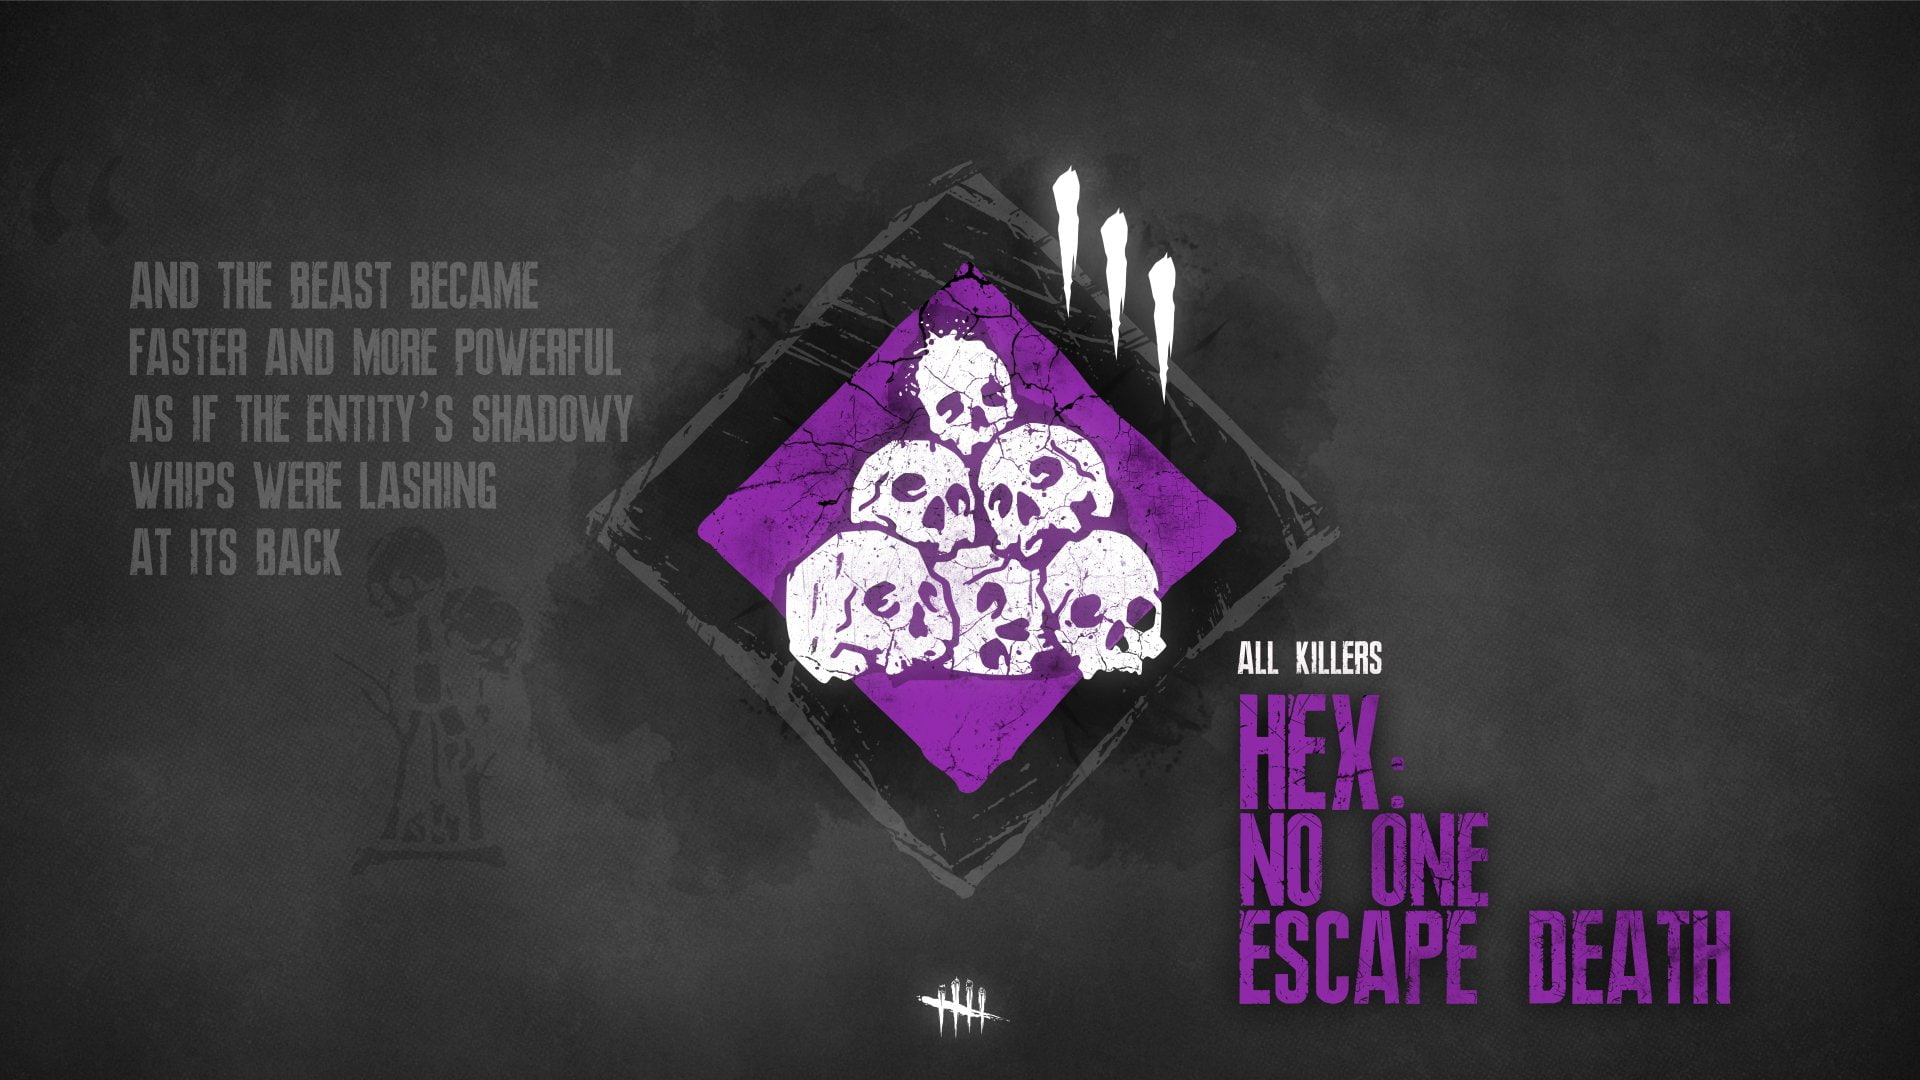 Video Game, Dead By Daylight, Hex: No one escape death (Dead by Daylight)